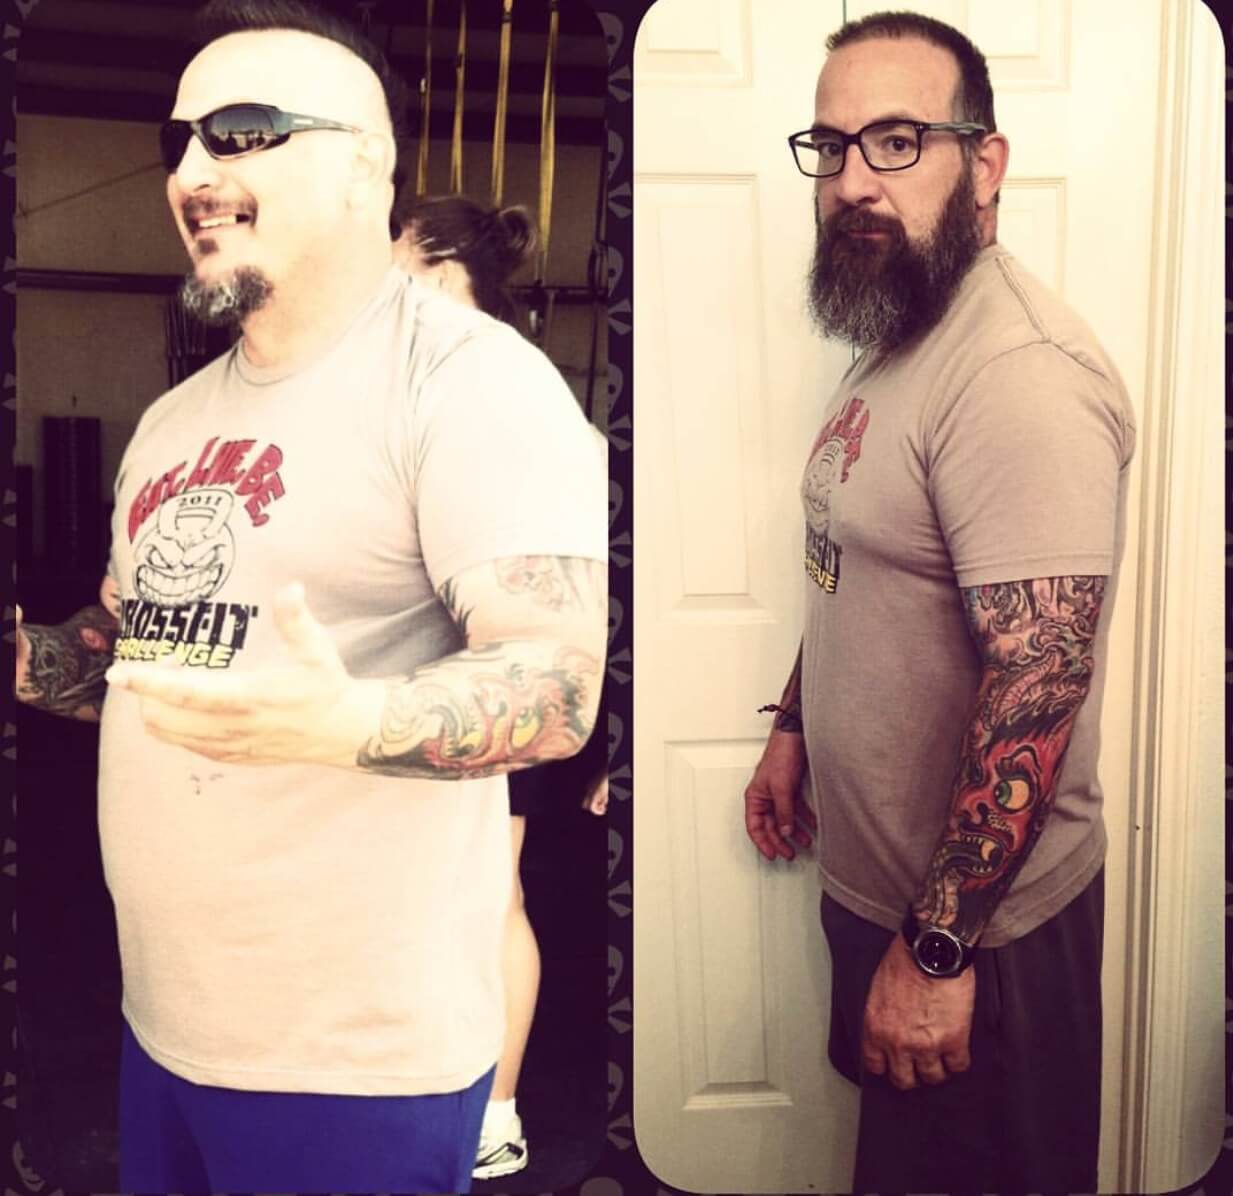 Rodney McElyea Lost 48 lbs